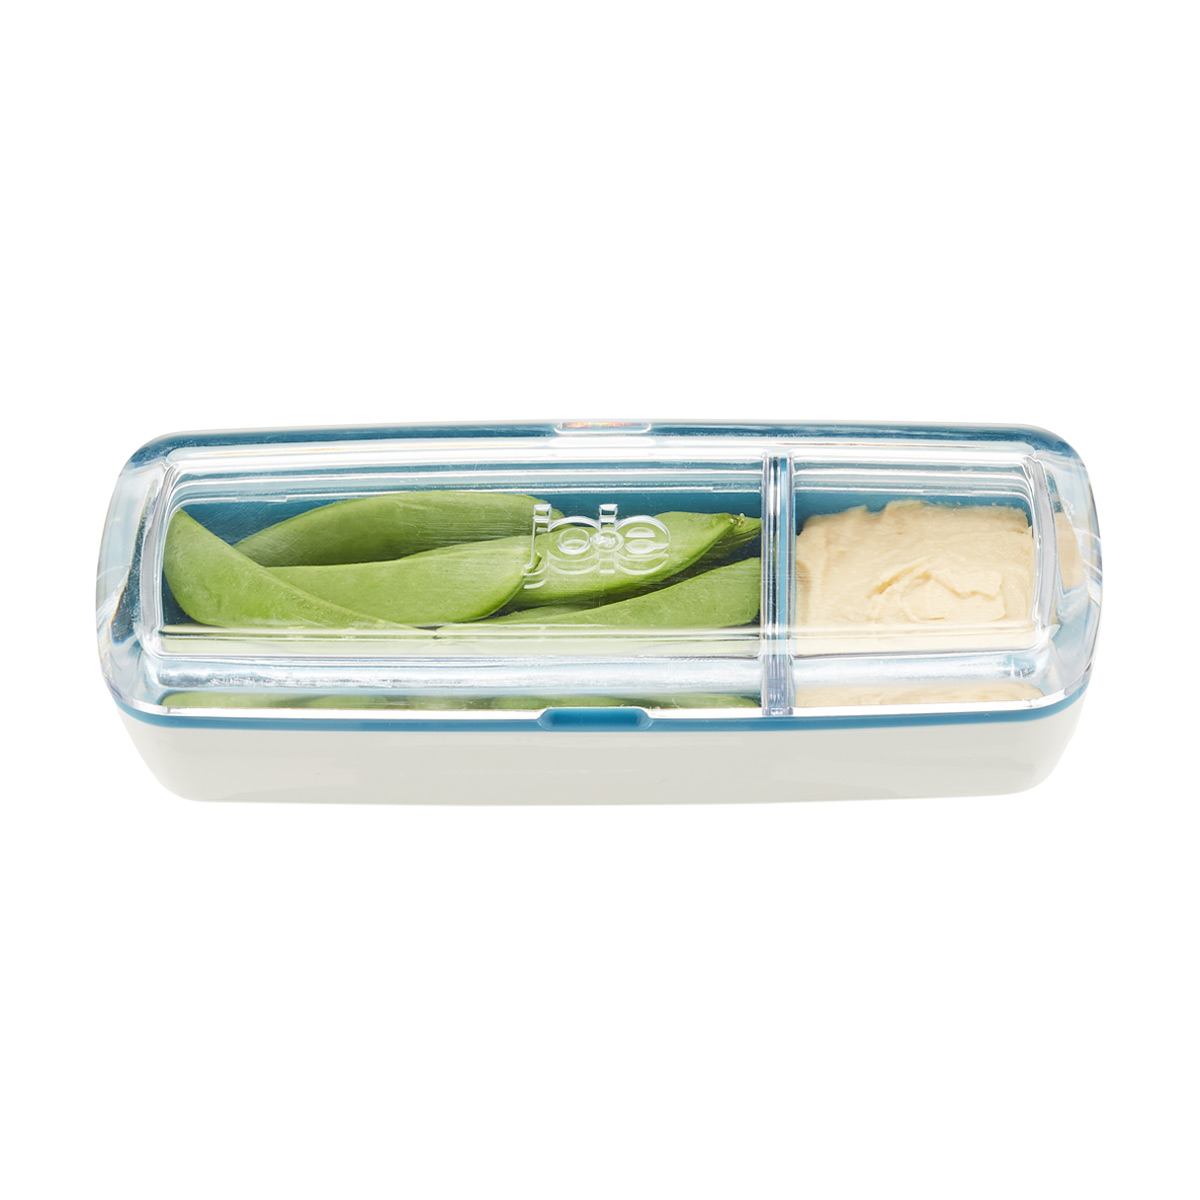 https://www.containerstore.com/catalogimages/346816/10075669-snack-on-the-go-blue.jpg